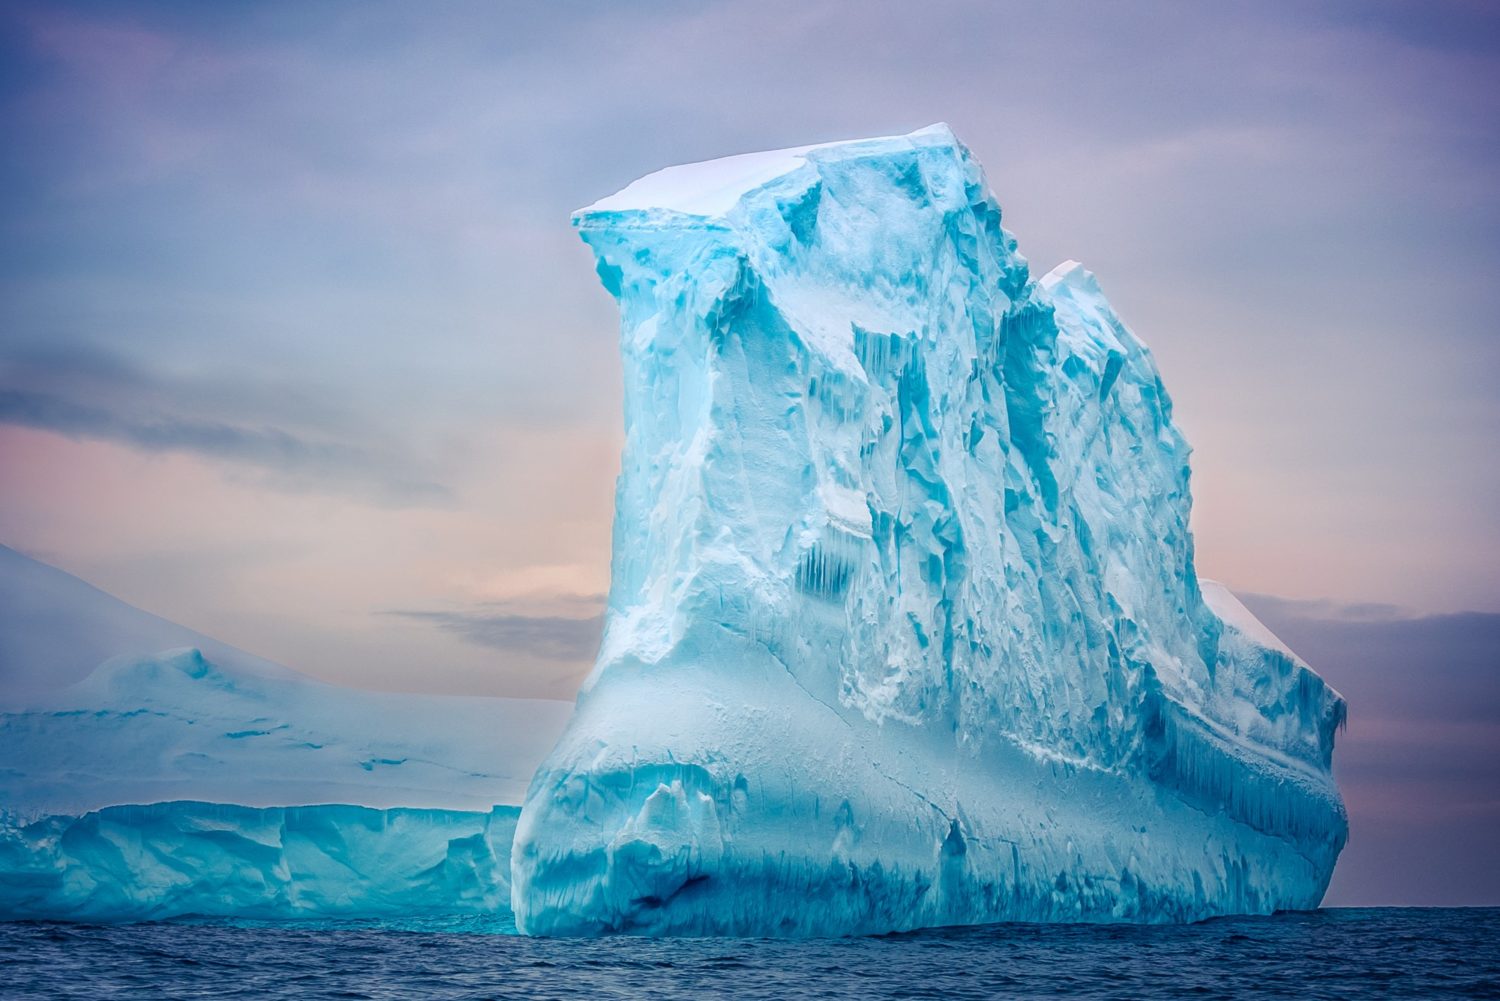 Antarctic iceberg of unusual form in the snow floating in open ocean. Pastel sunset sky in the background. Beauty world.